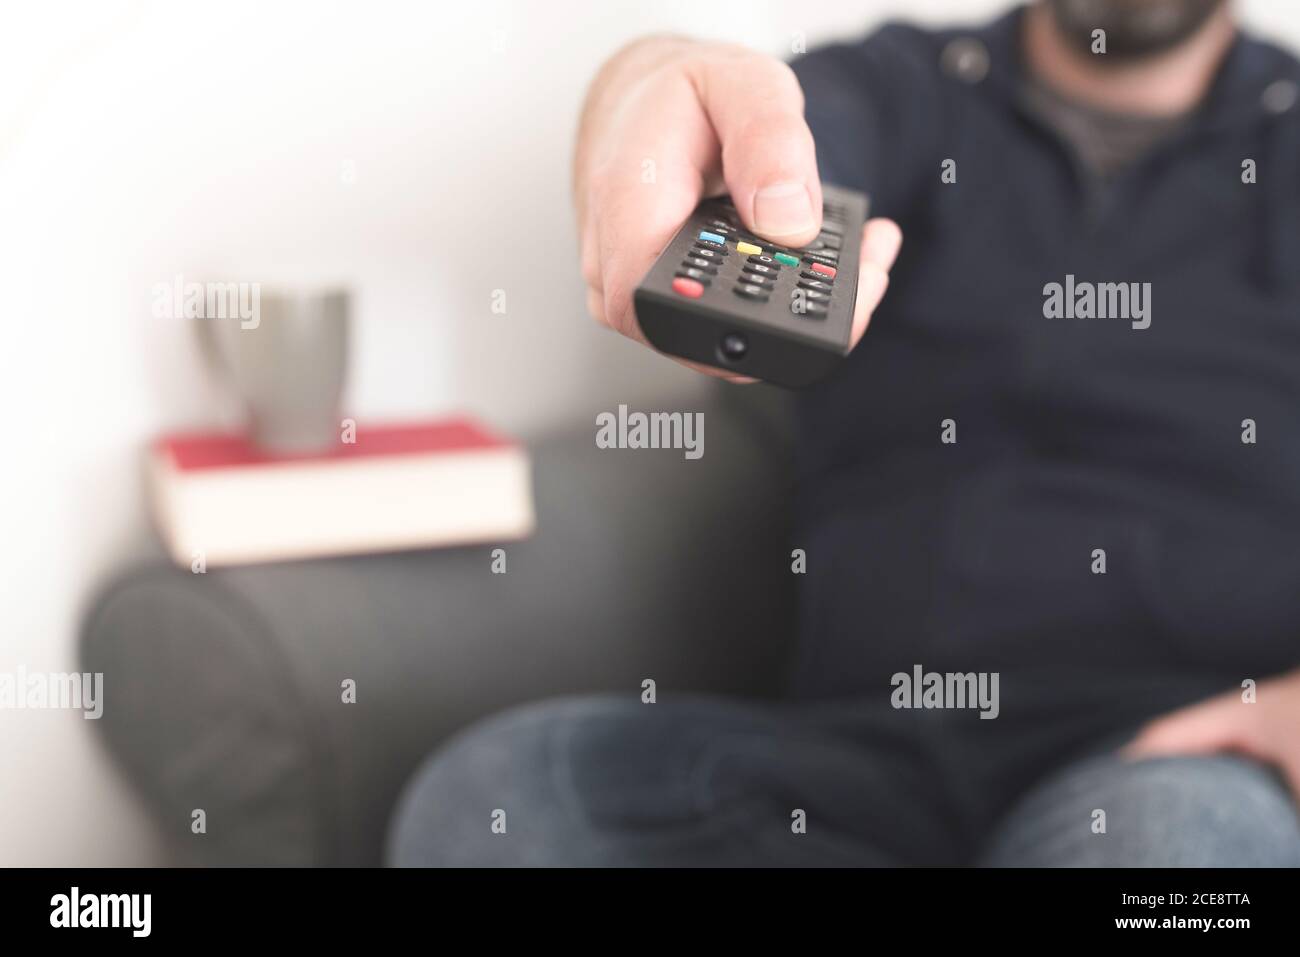 front view of person sitting on sofa using TV remote control to change channels Stock Photo